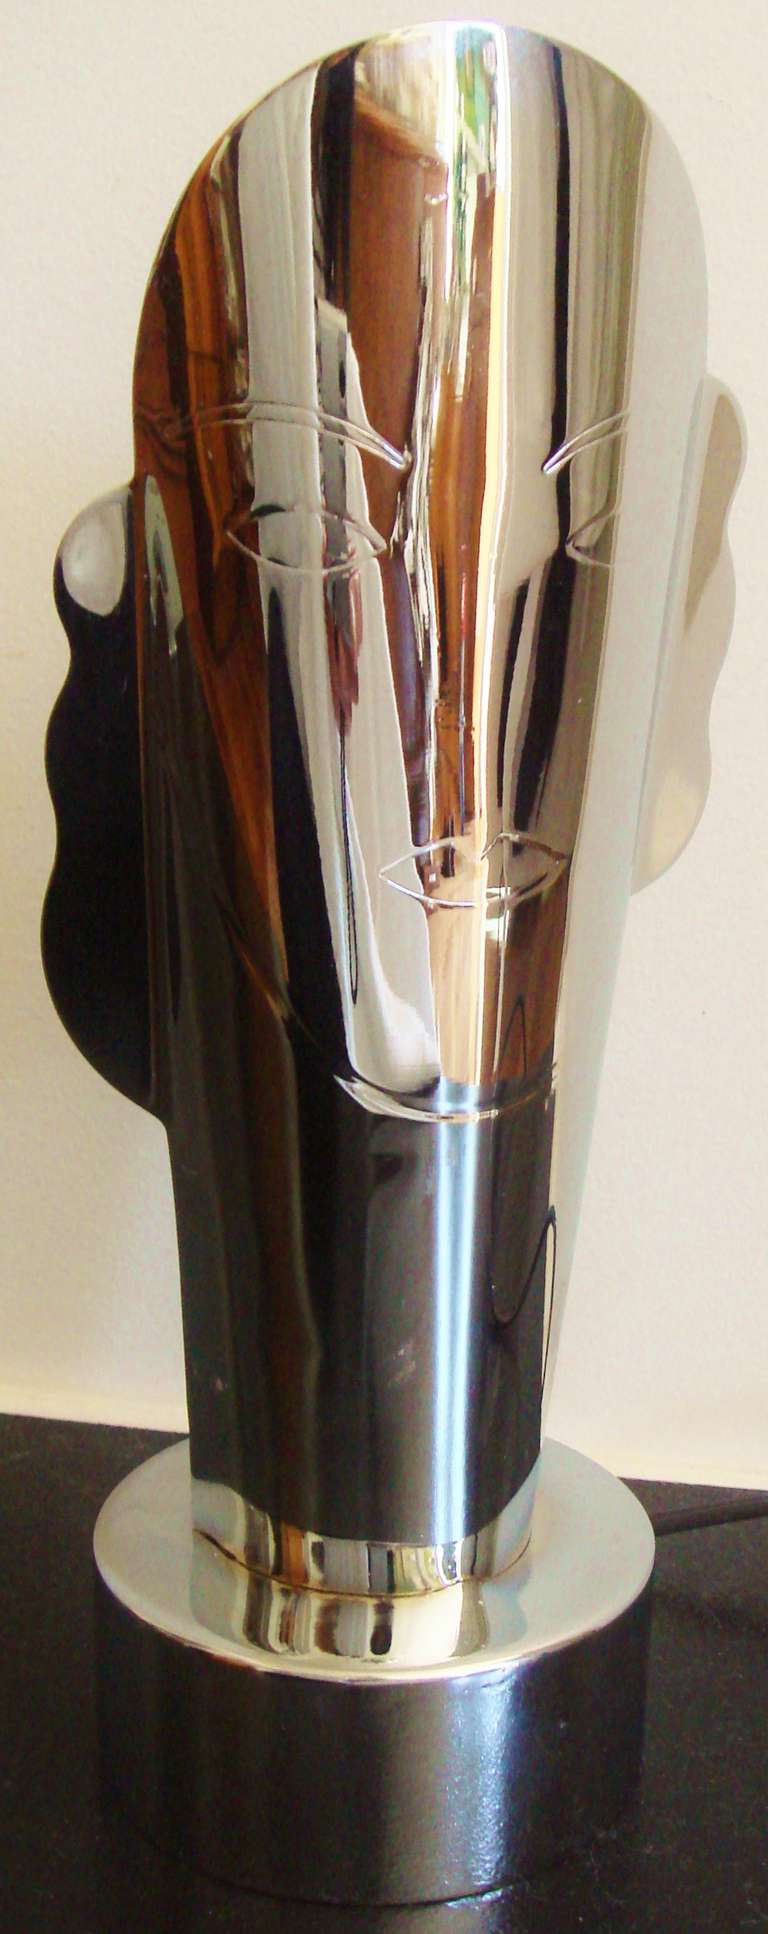 This American Art Deco figural chrome plated 